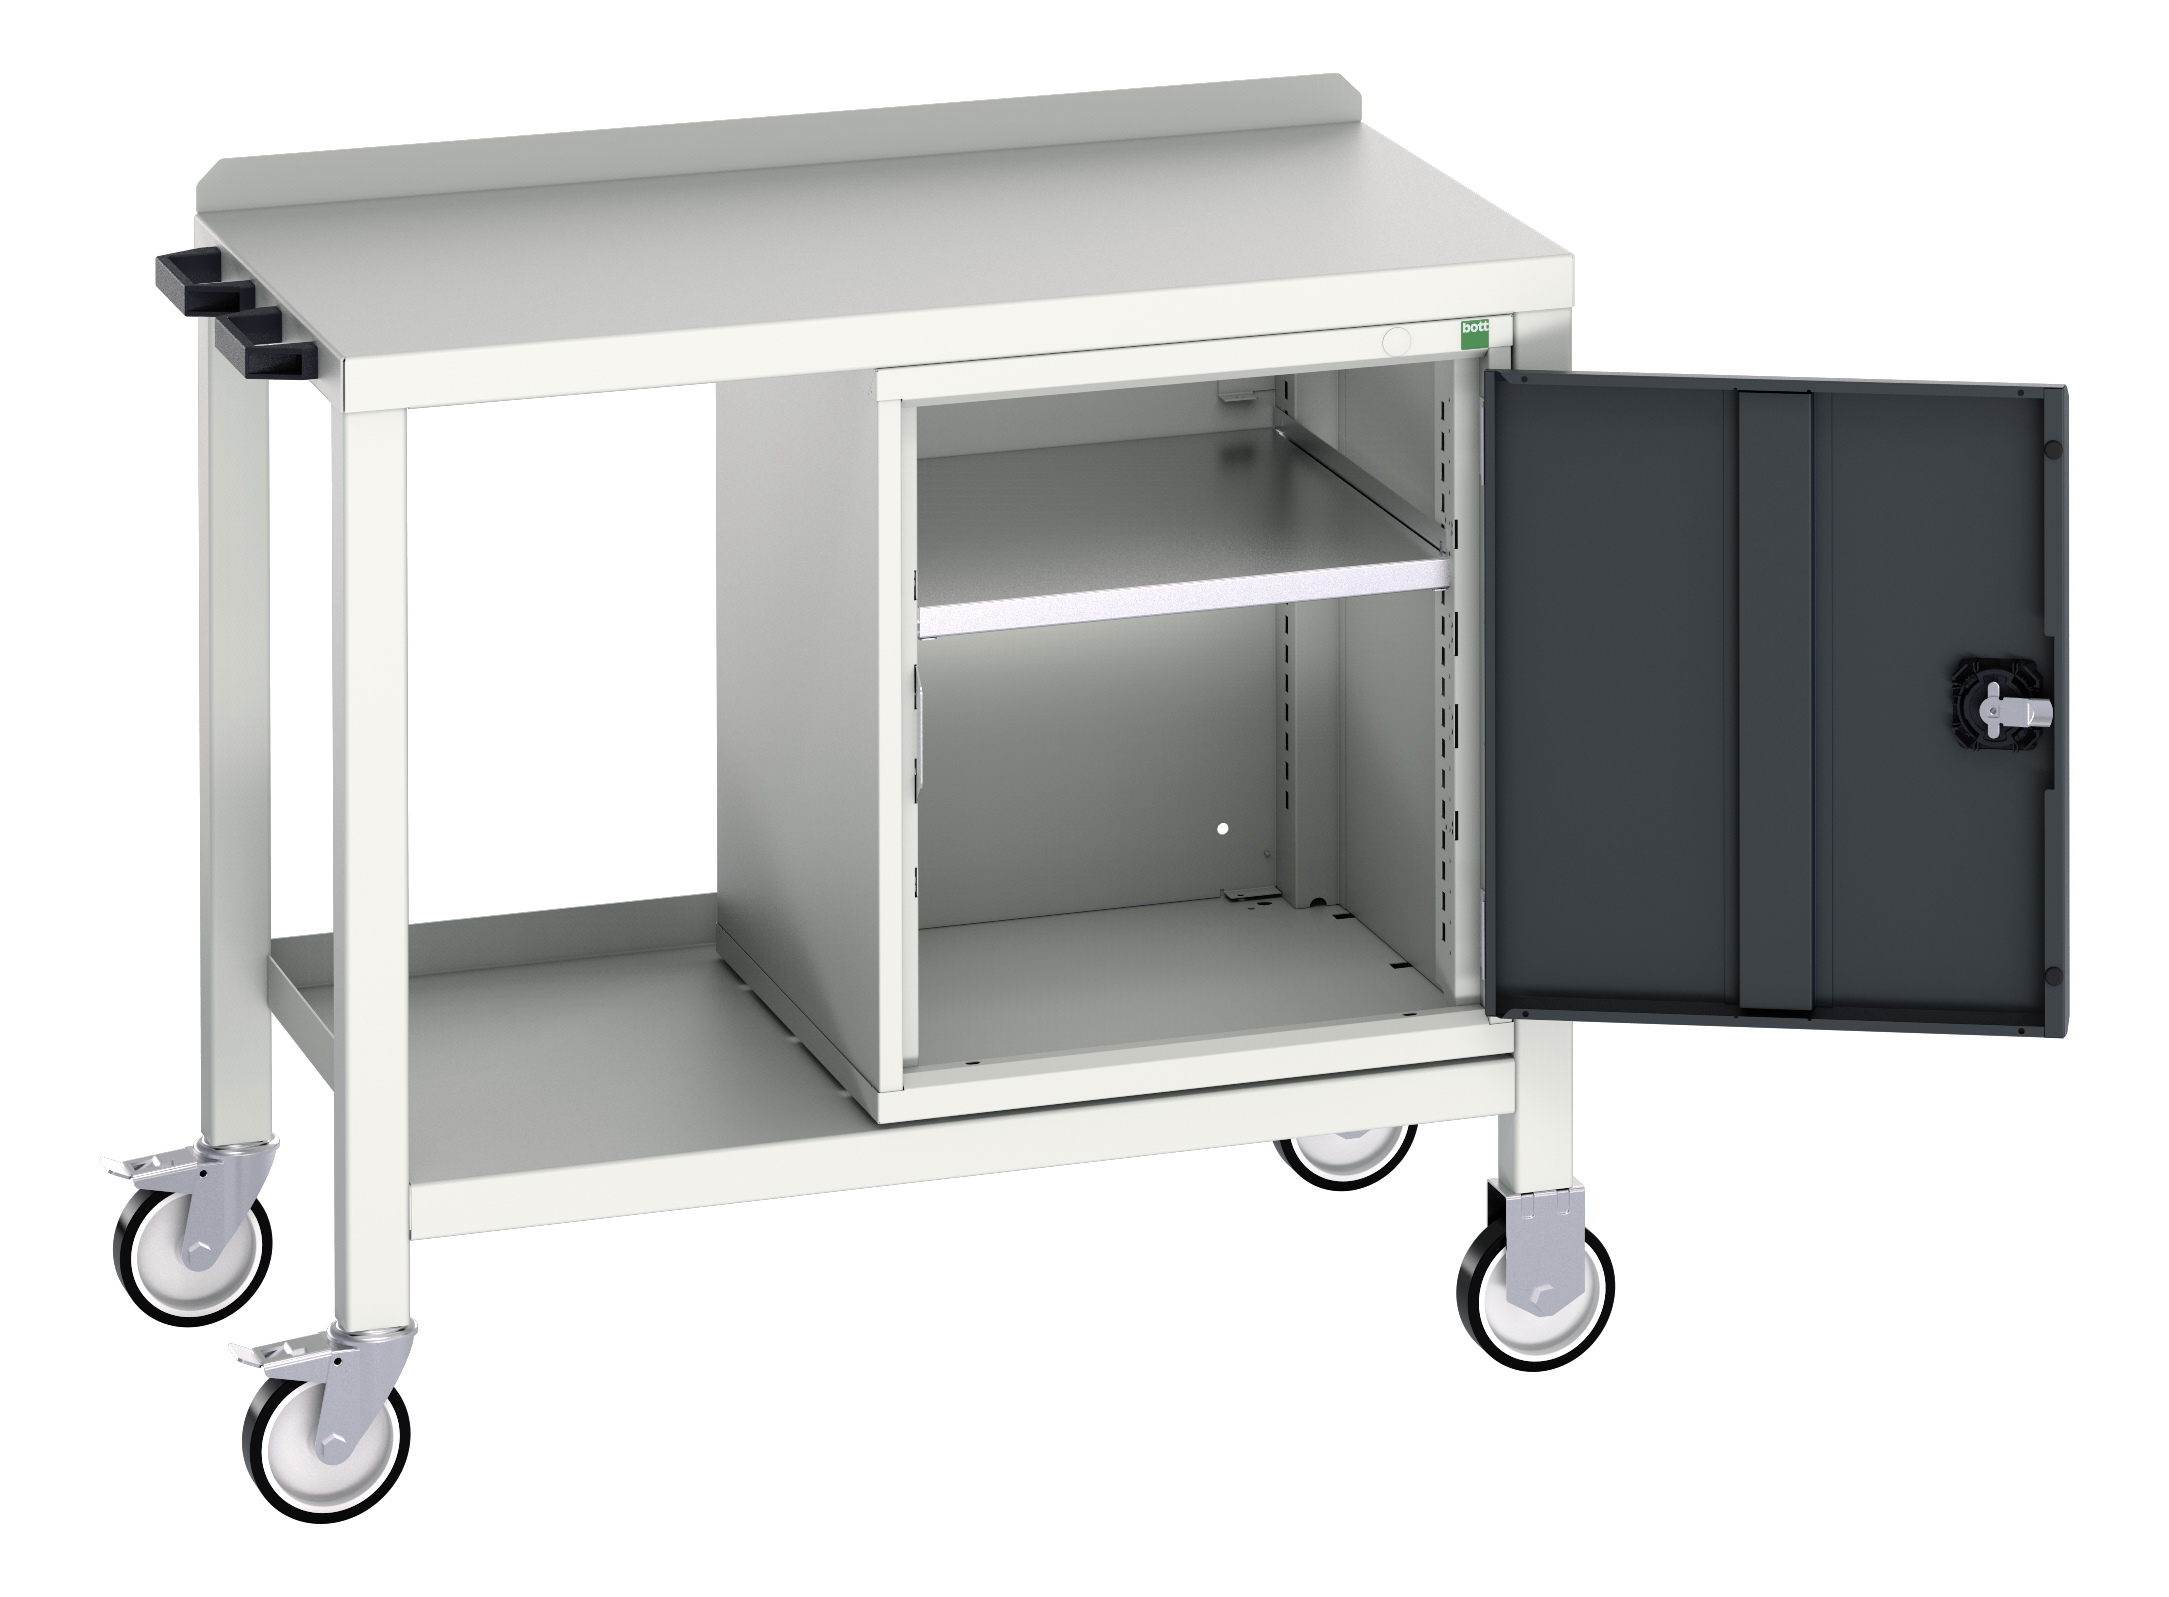 Bott Verso Mobile Welded Bench With Full Cupboard - 16922802.19